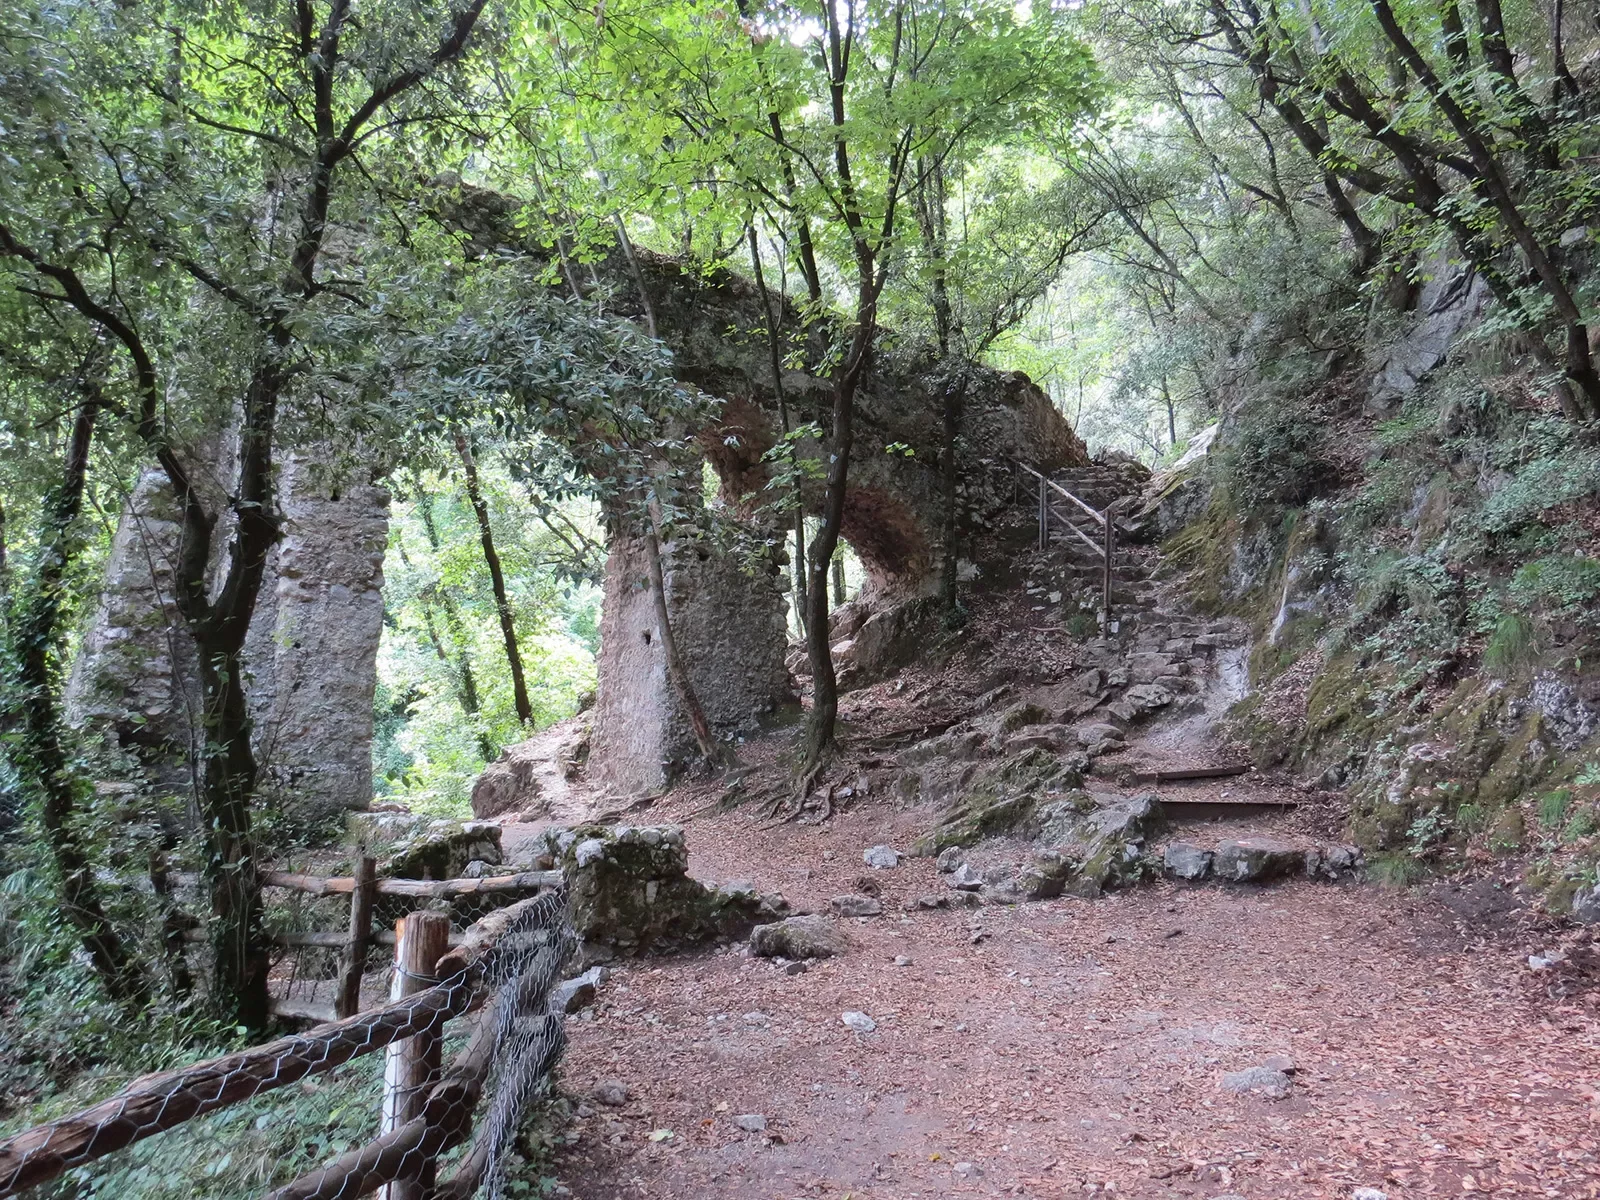 Shot of old, rocky bridge in forest.